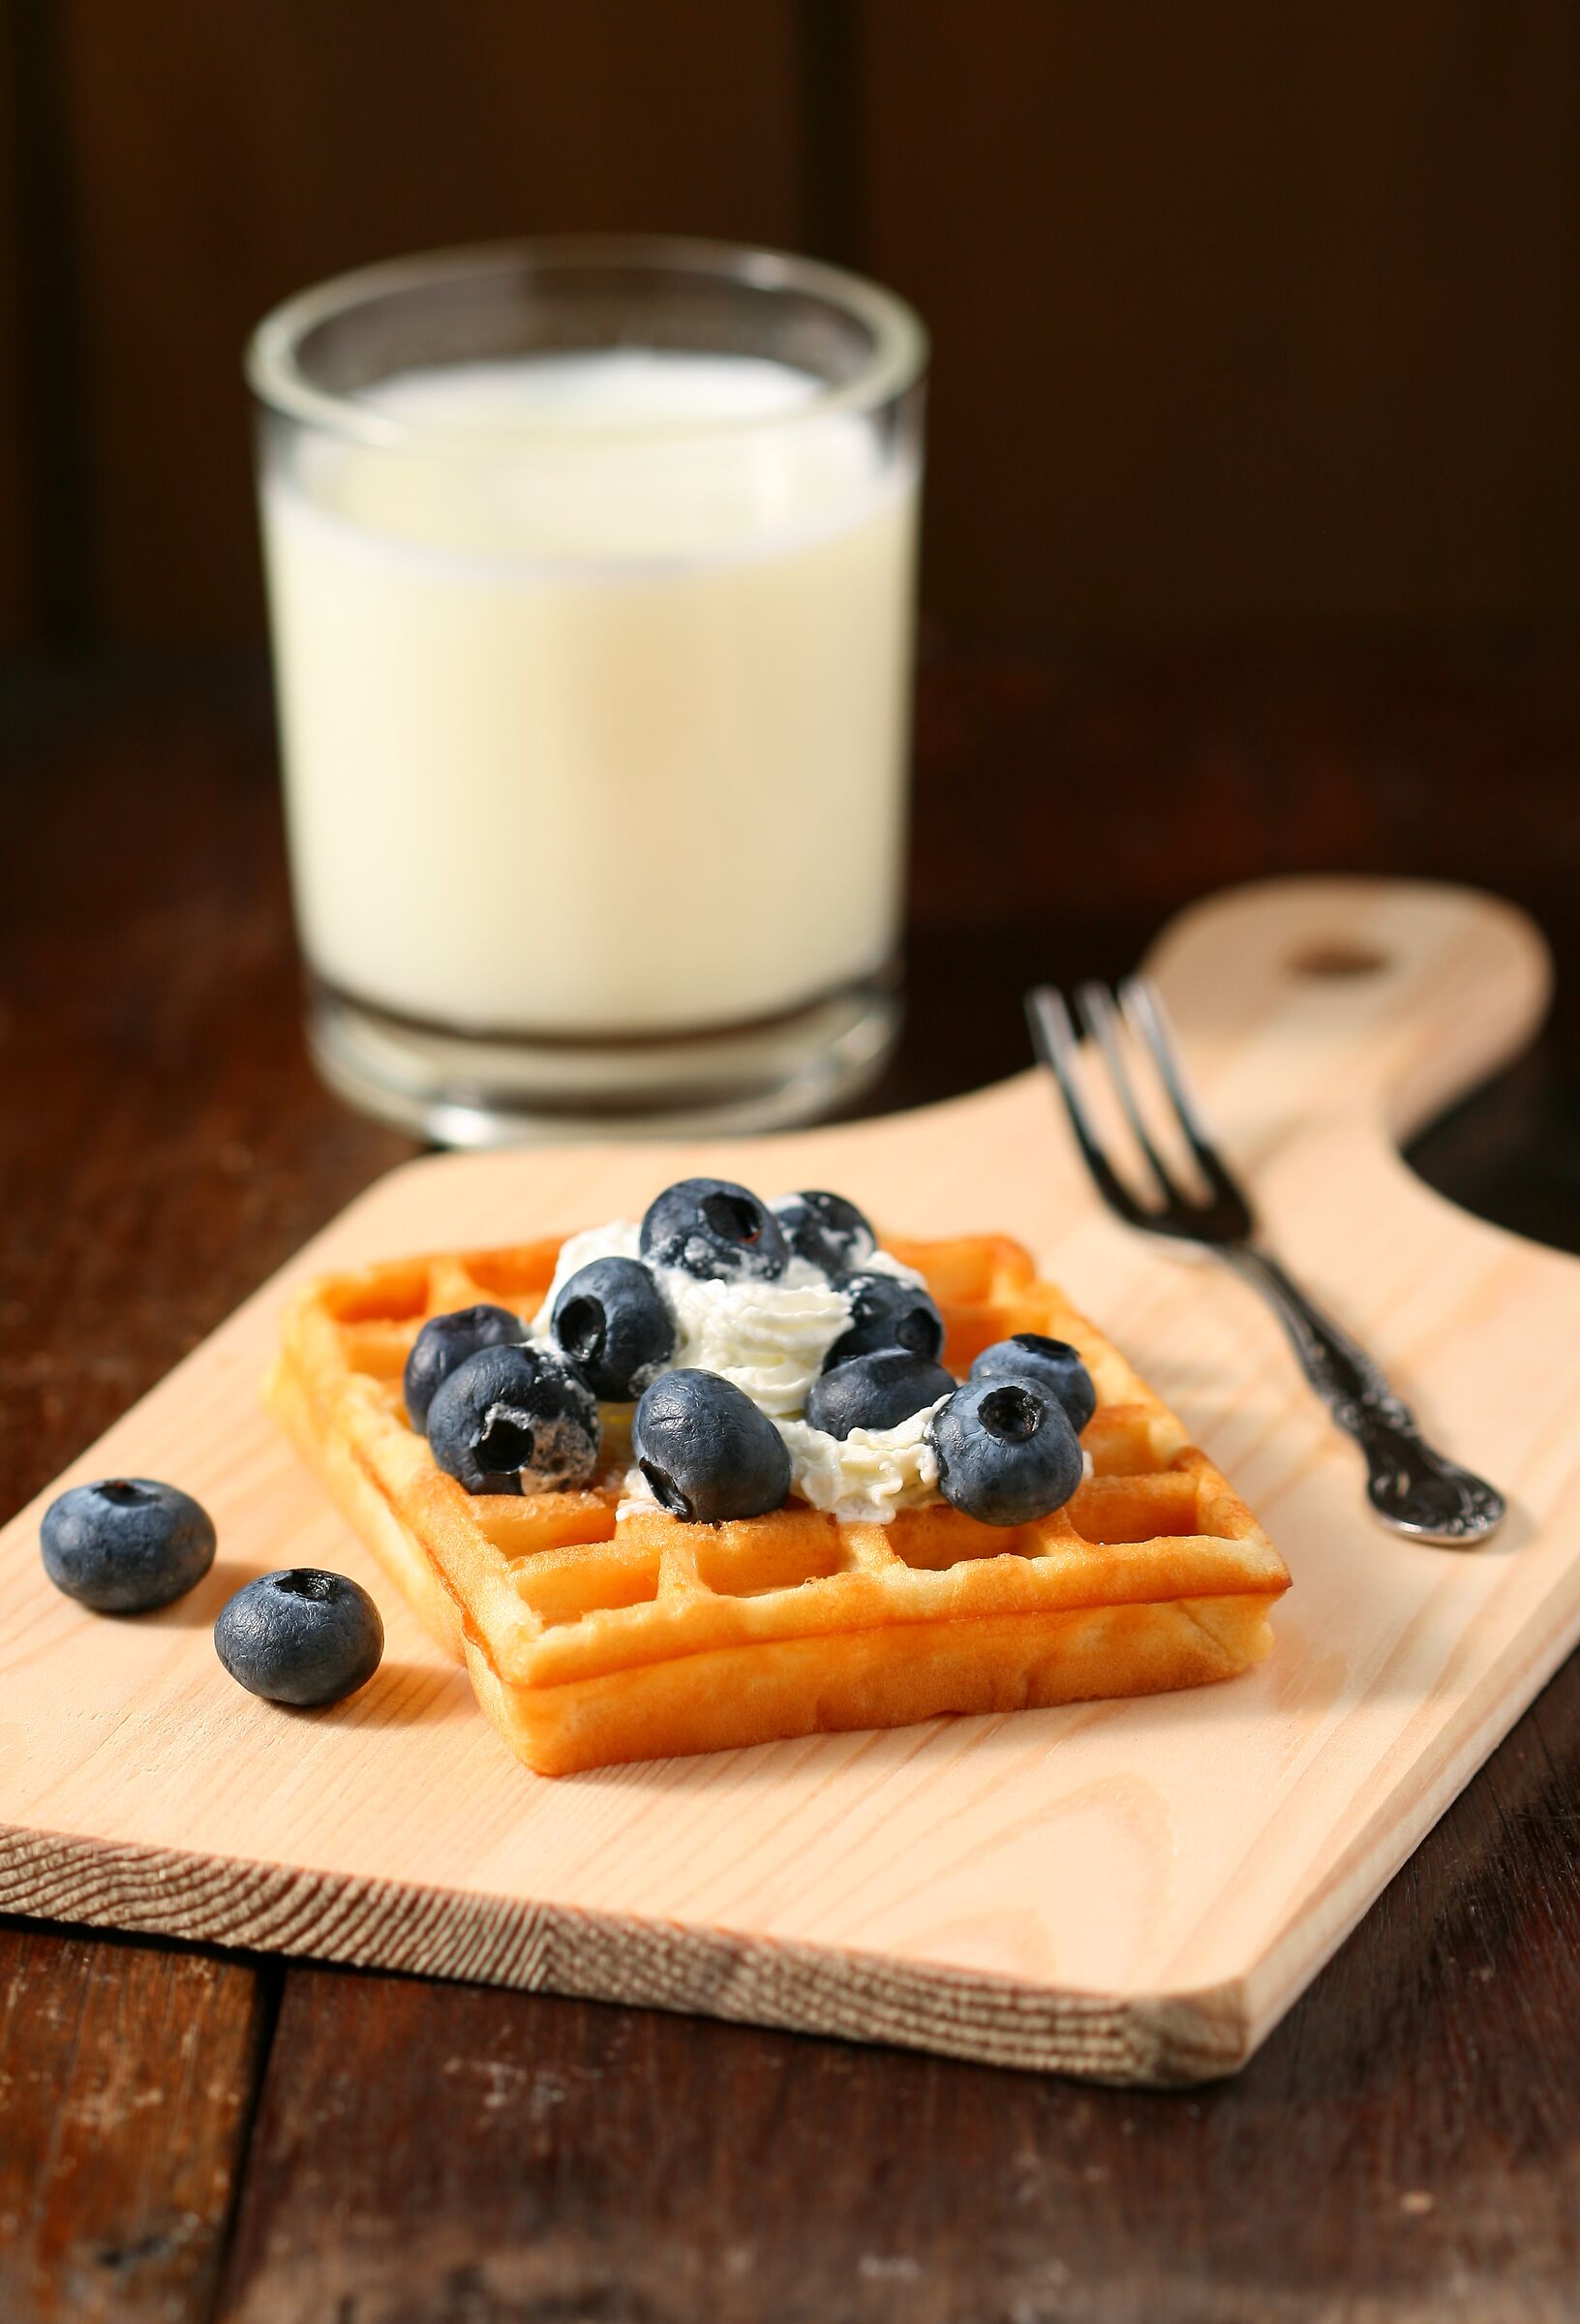 Blue berry with whipped cream on waffle...